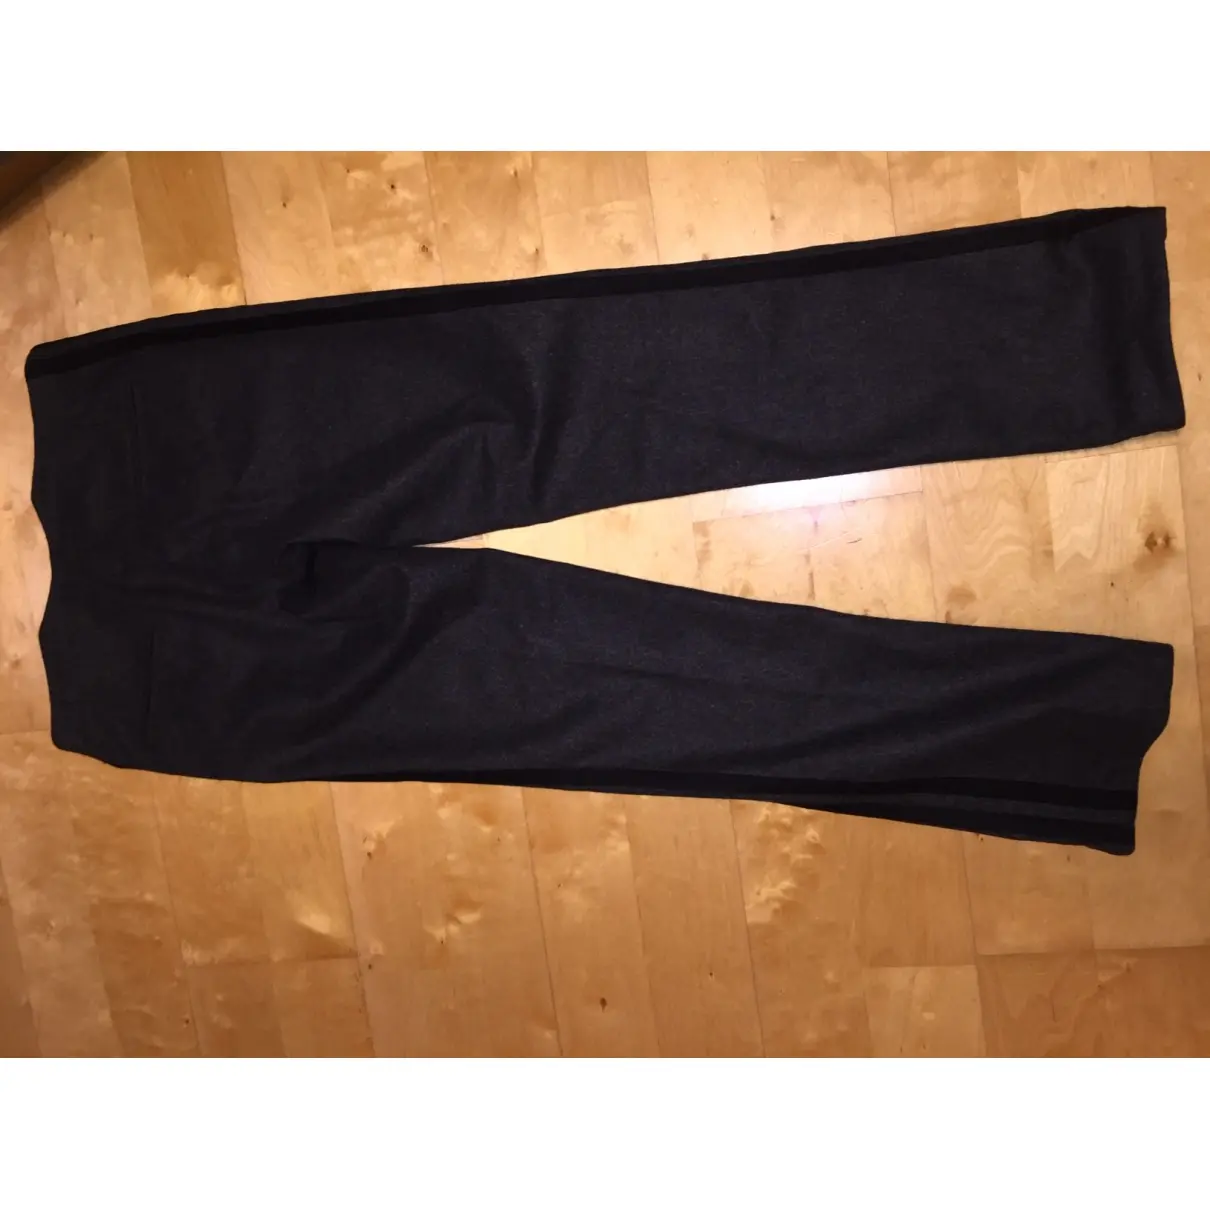 Vivienne Westwood Anglomania Wool chino pants for sale